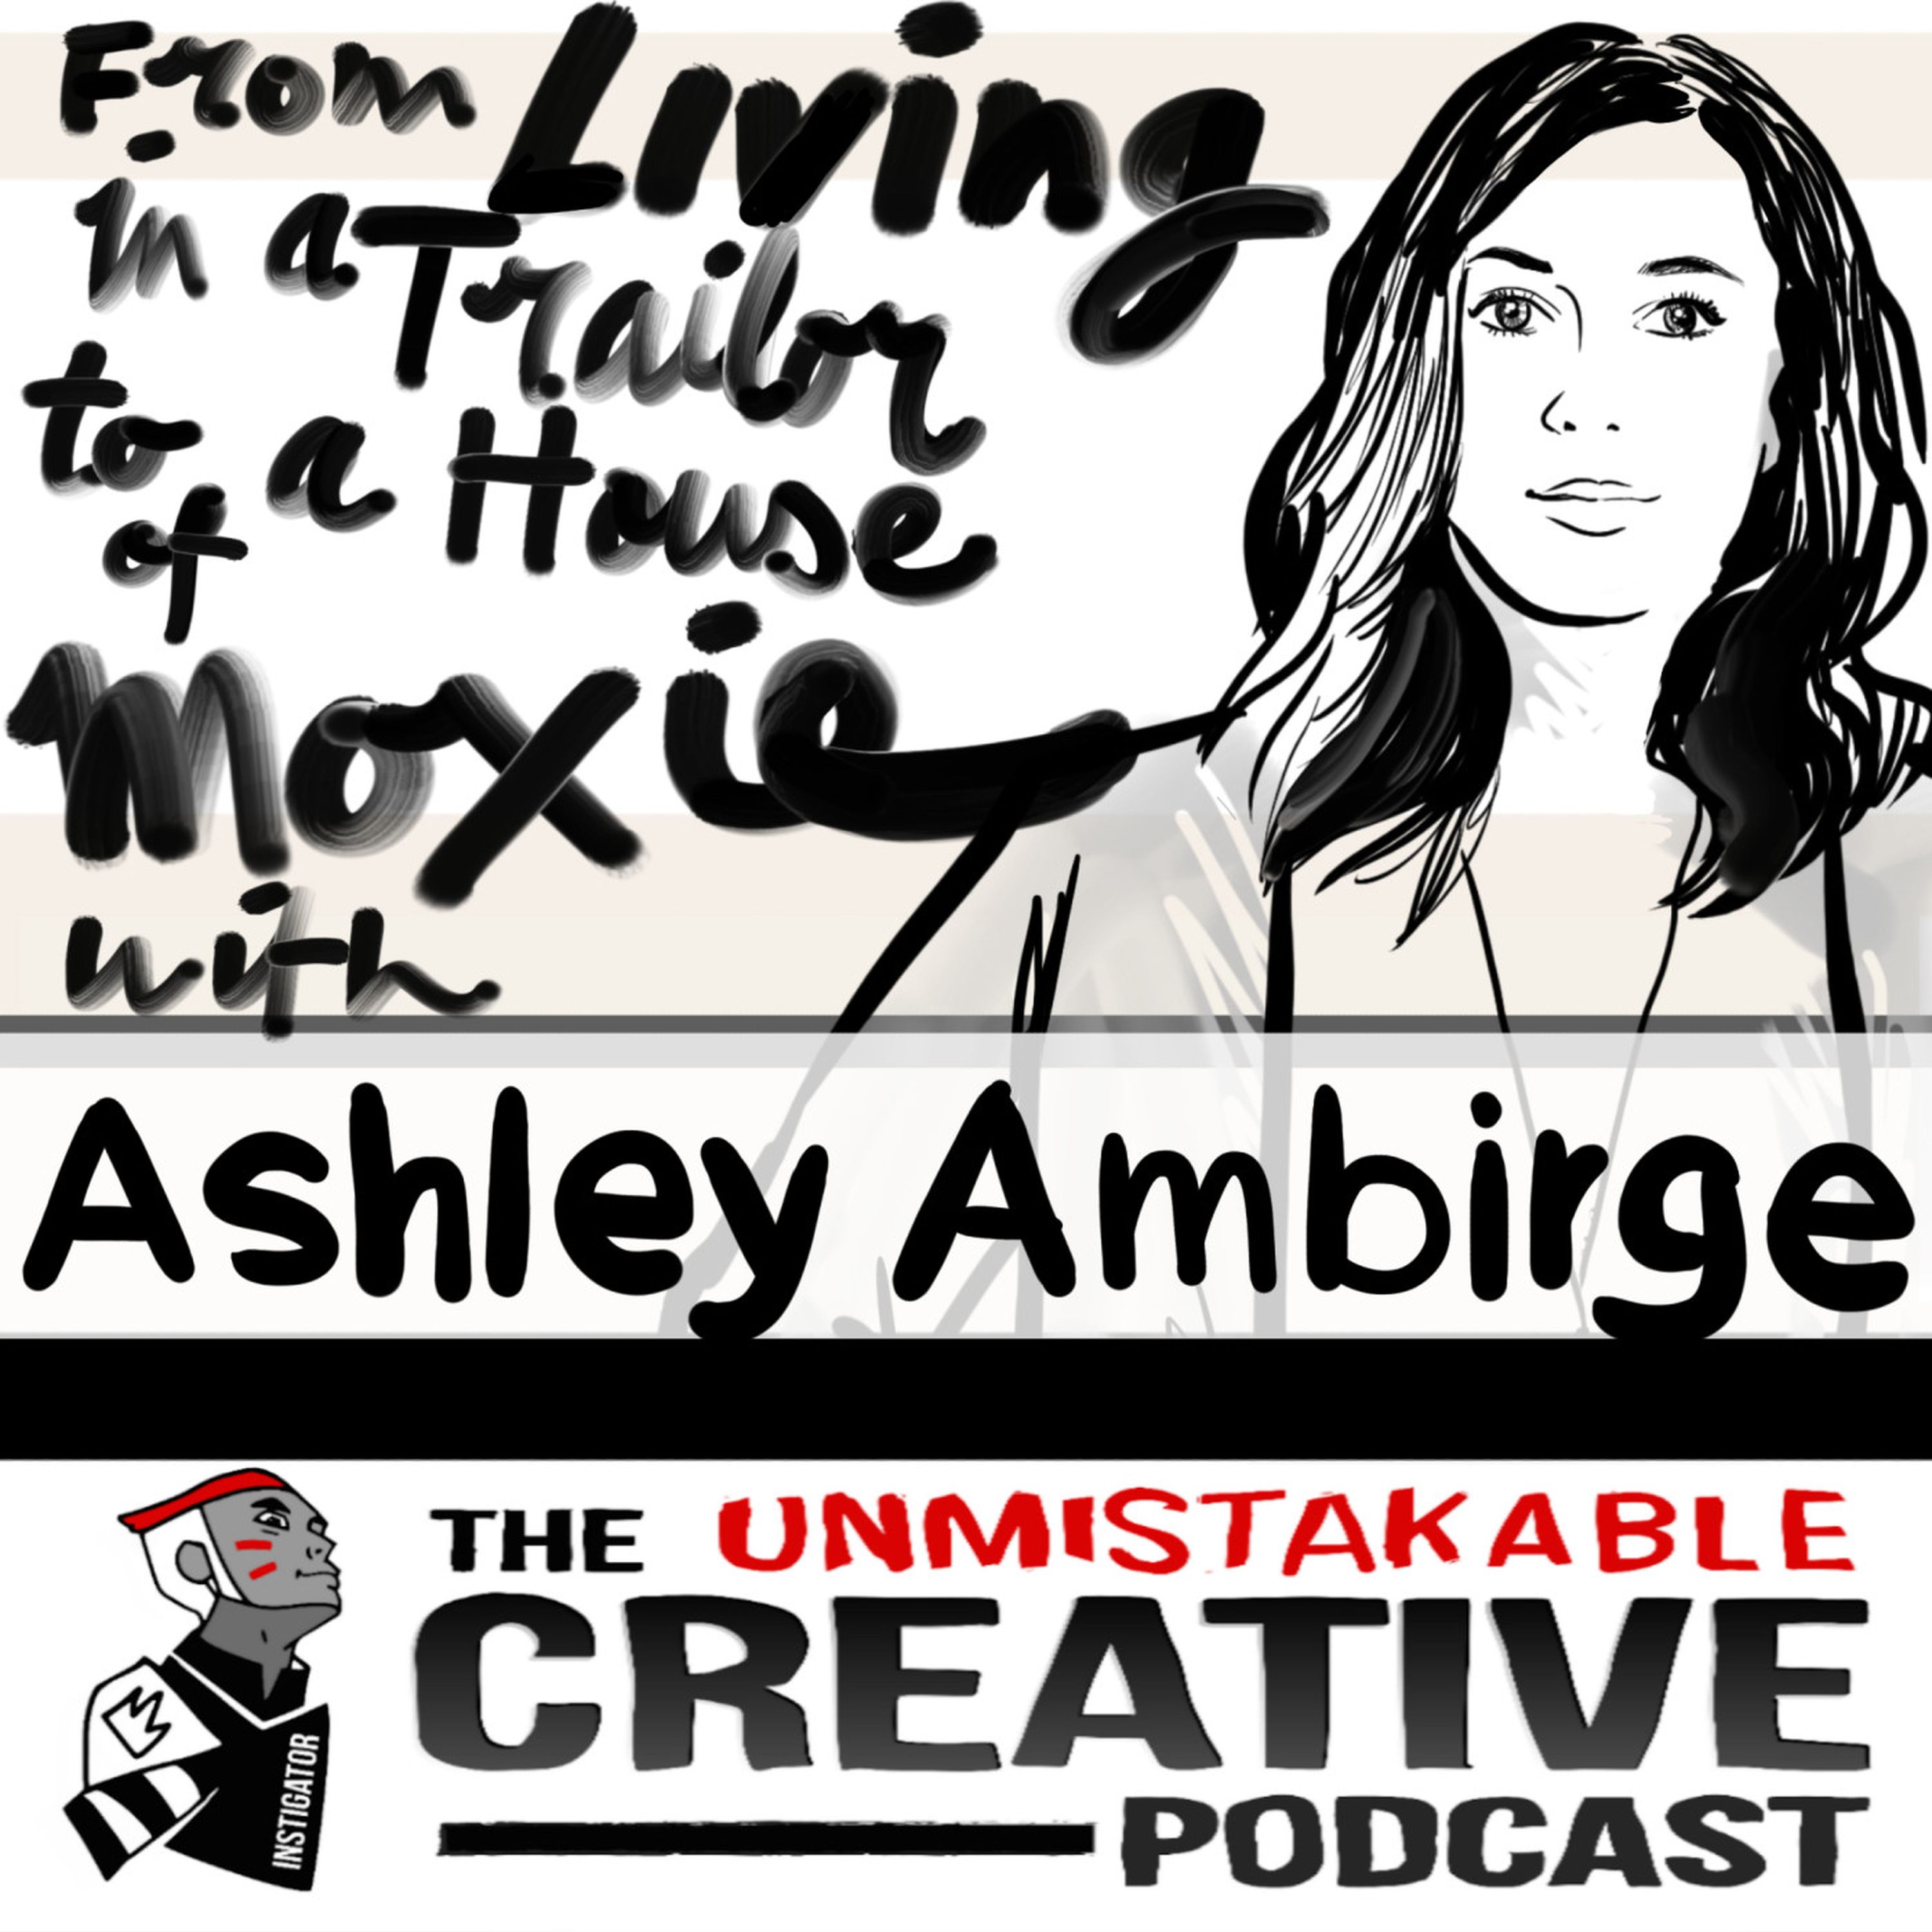 From Living in a Trailer to a House of Moxie With Ashley Ambirge